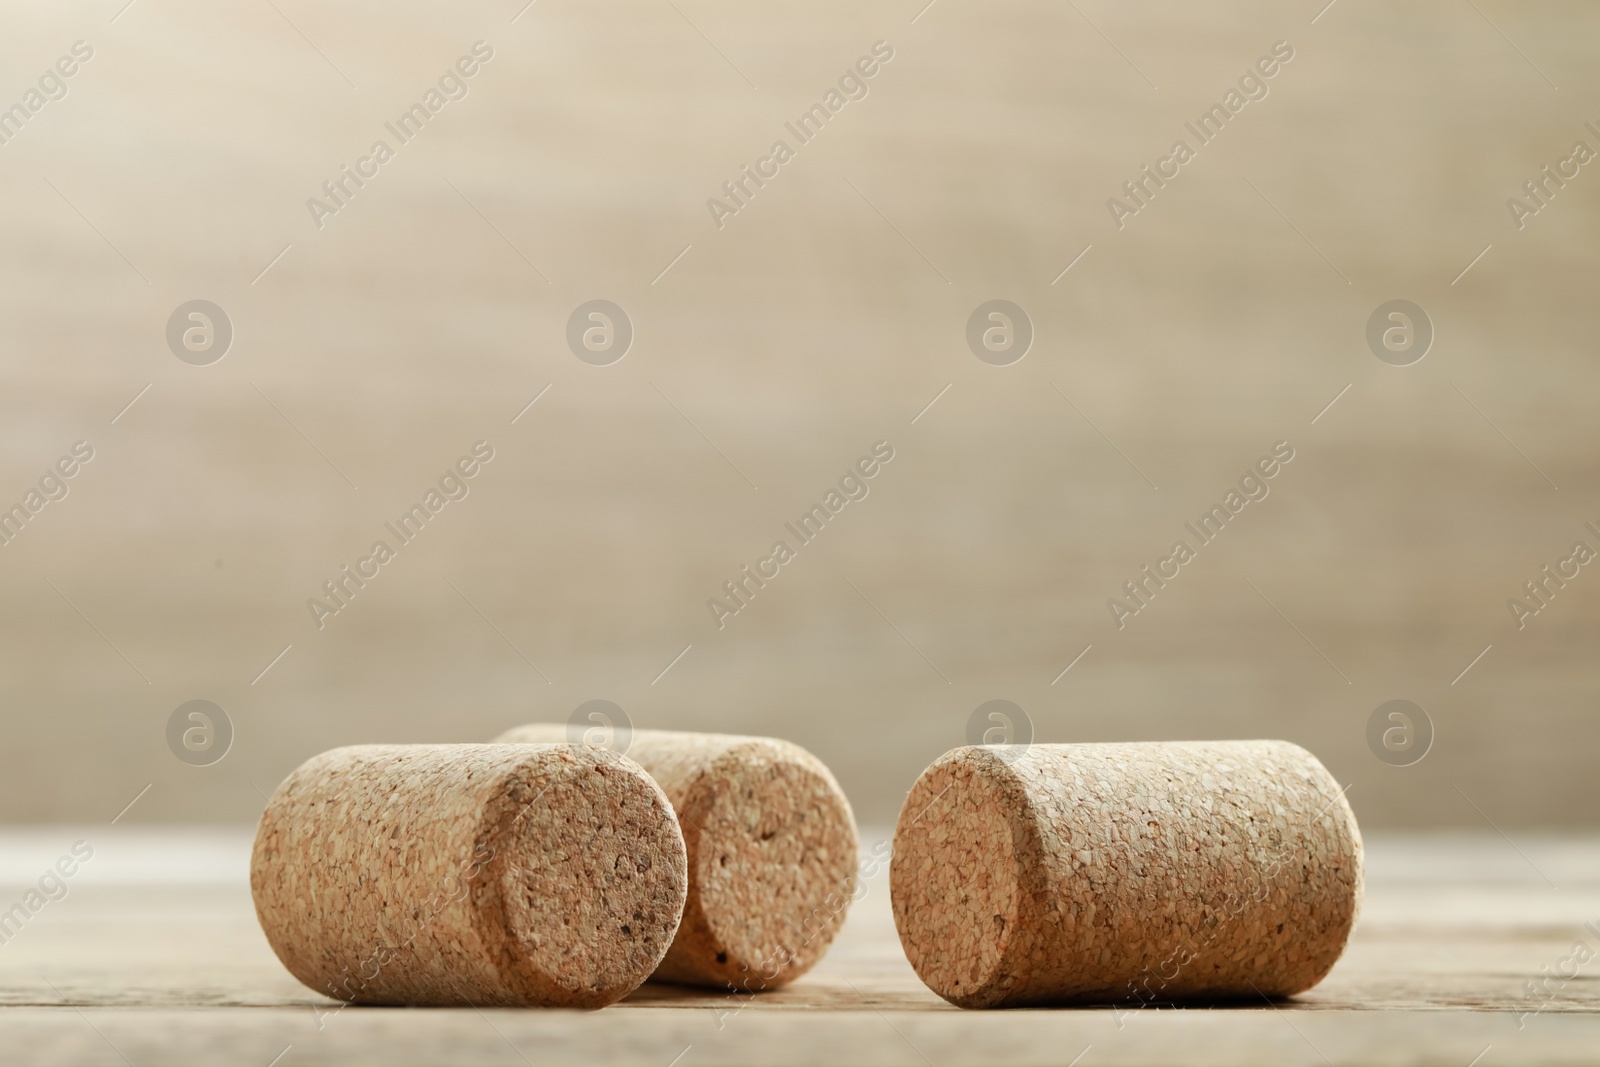 Photo of Corks of wine bottles on wooden table, space for text